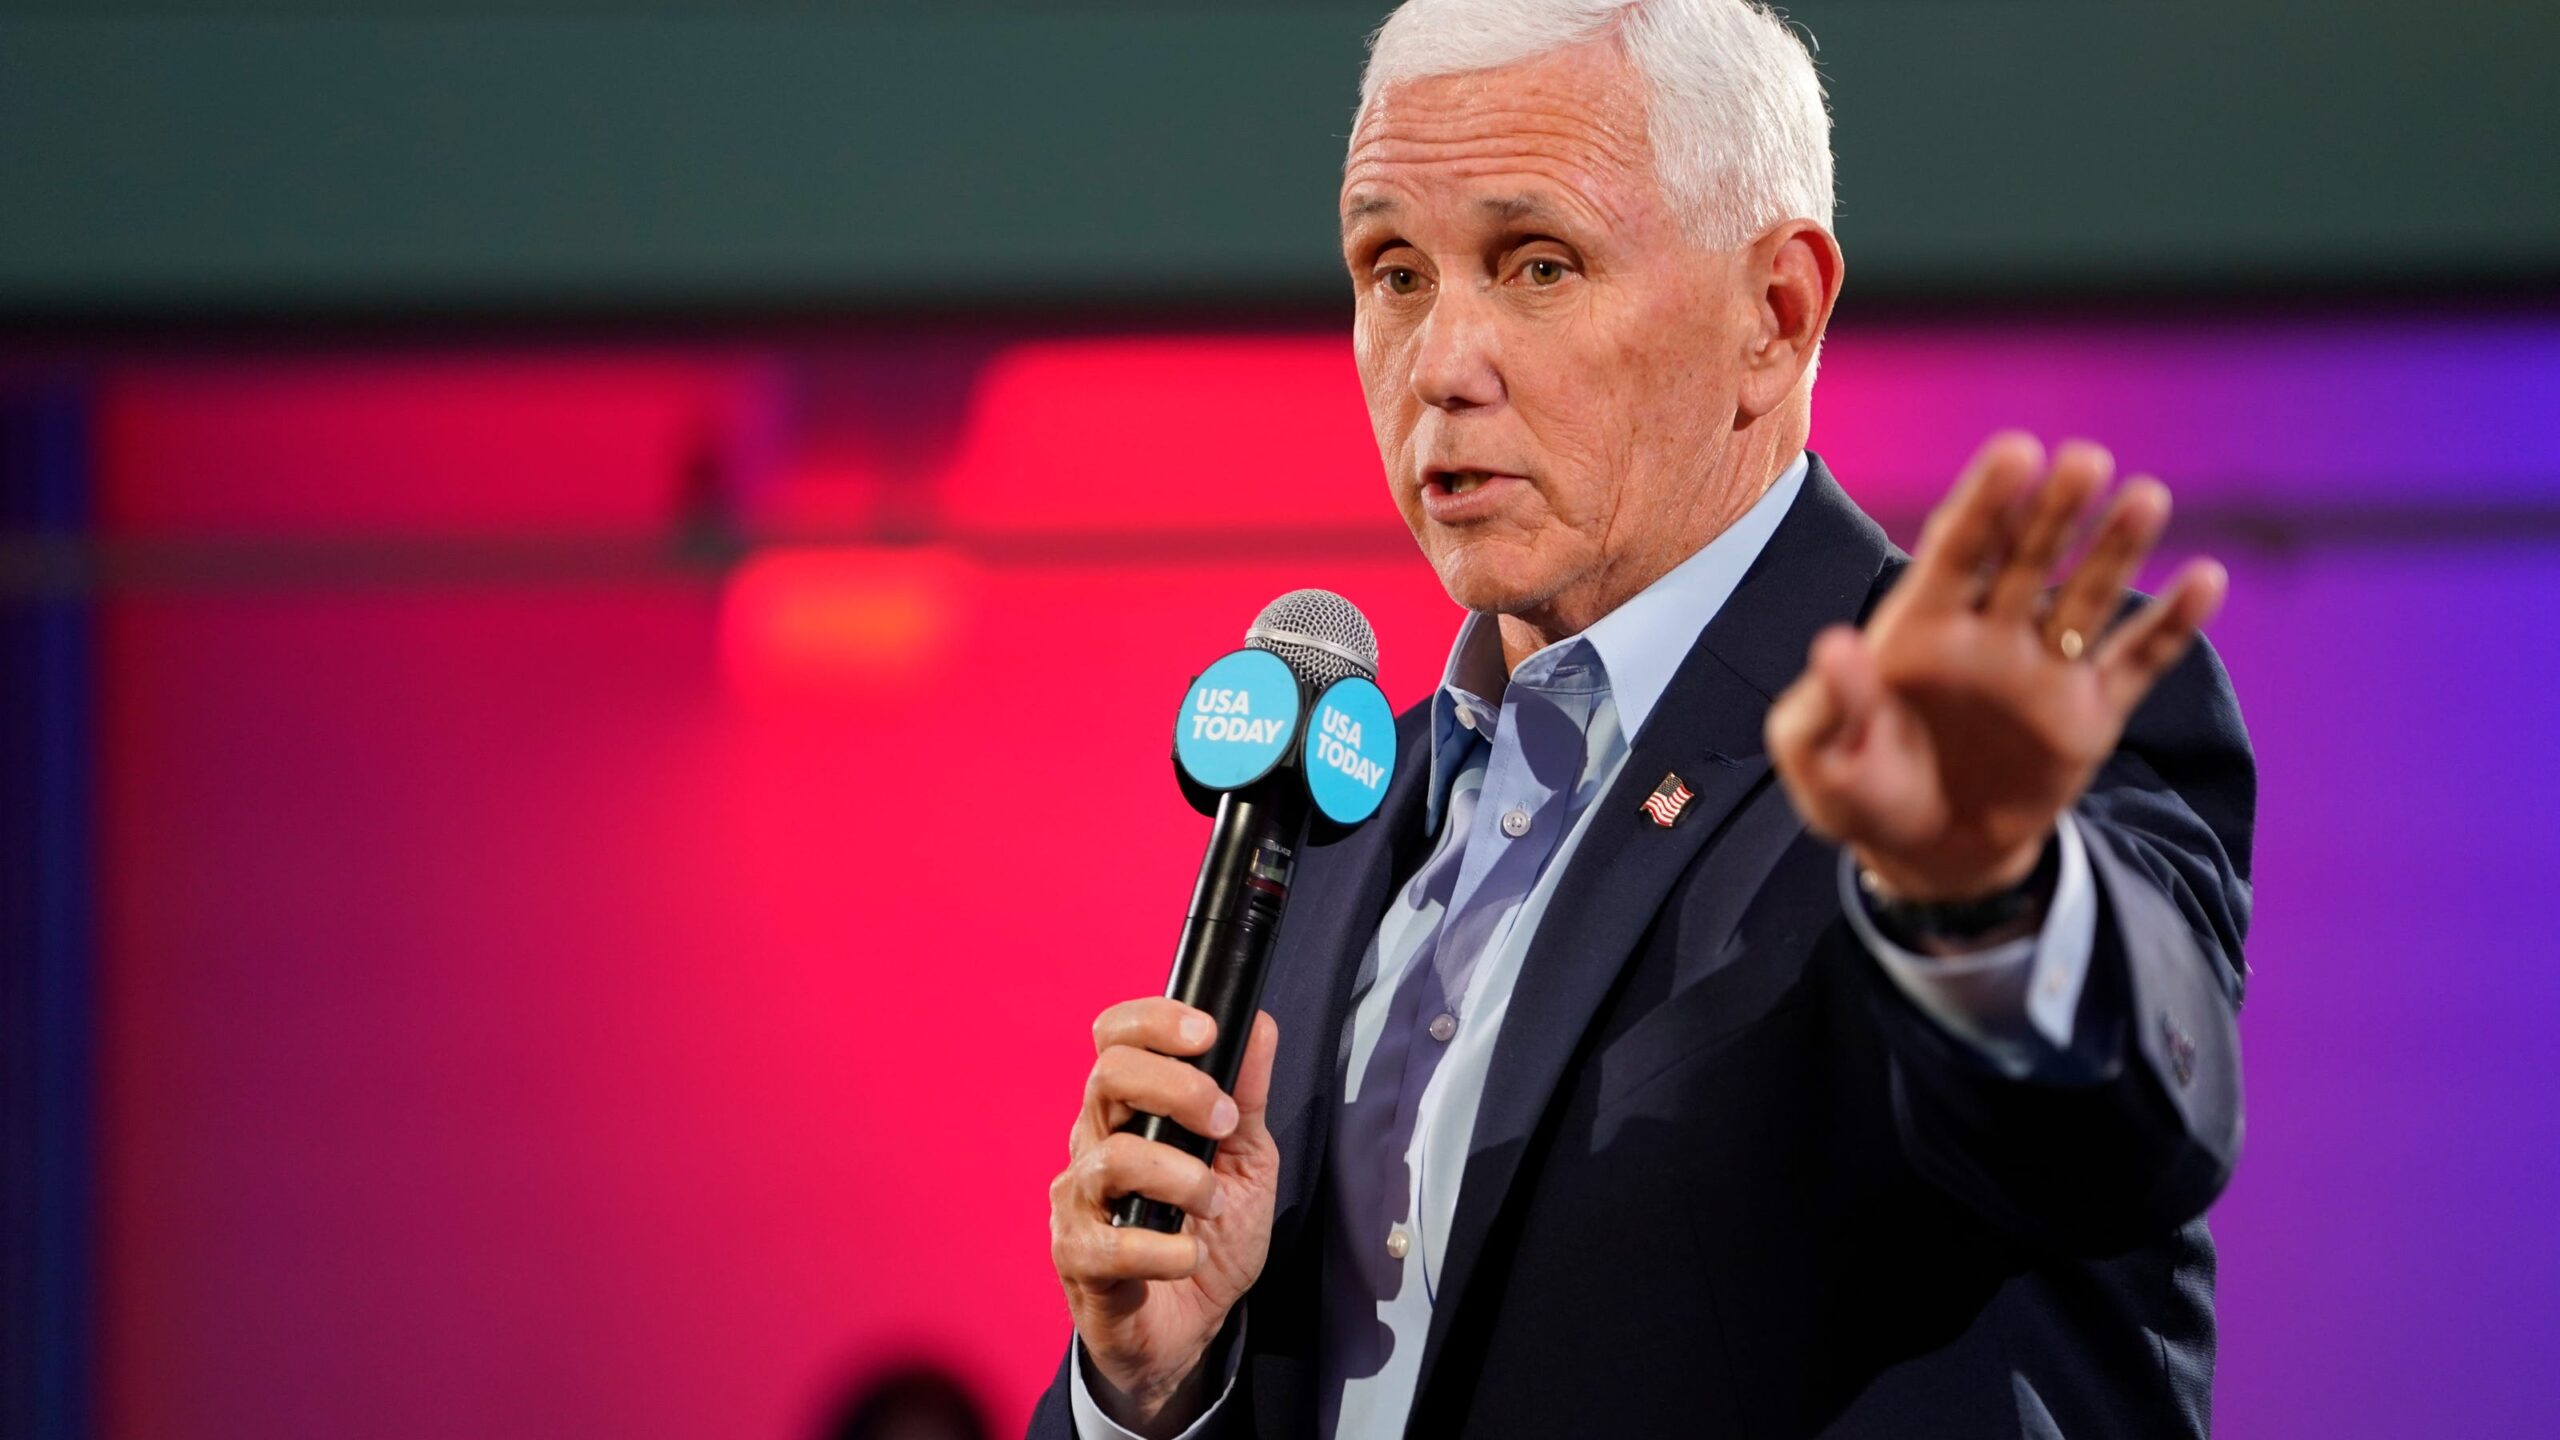 Mike Pence refutes Trump on Jan. 6, urges GOP voters to pick different candidate in 2024